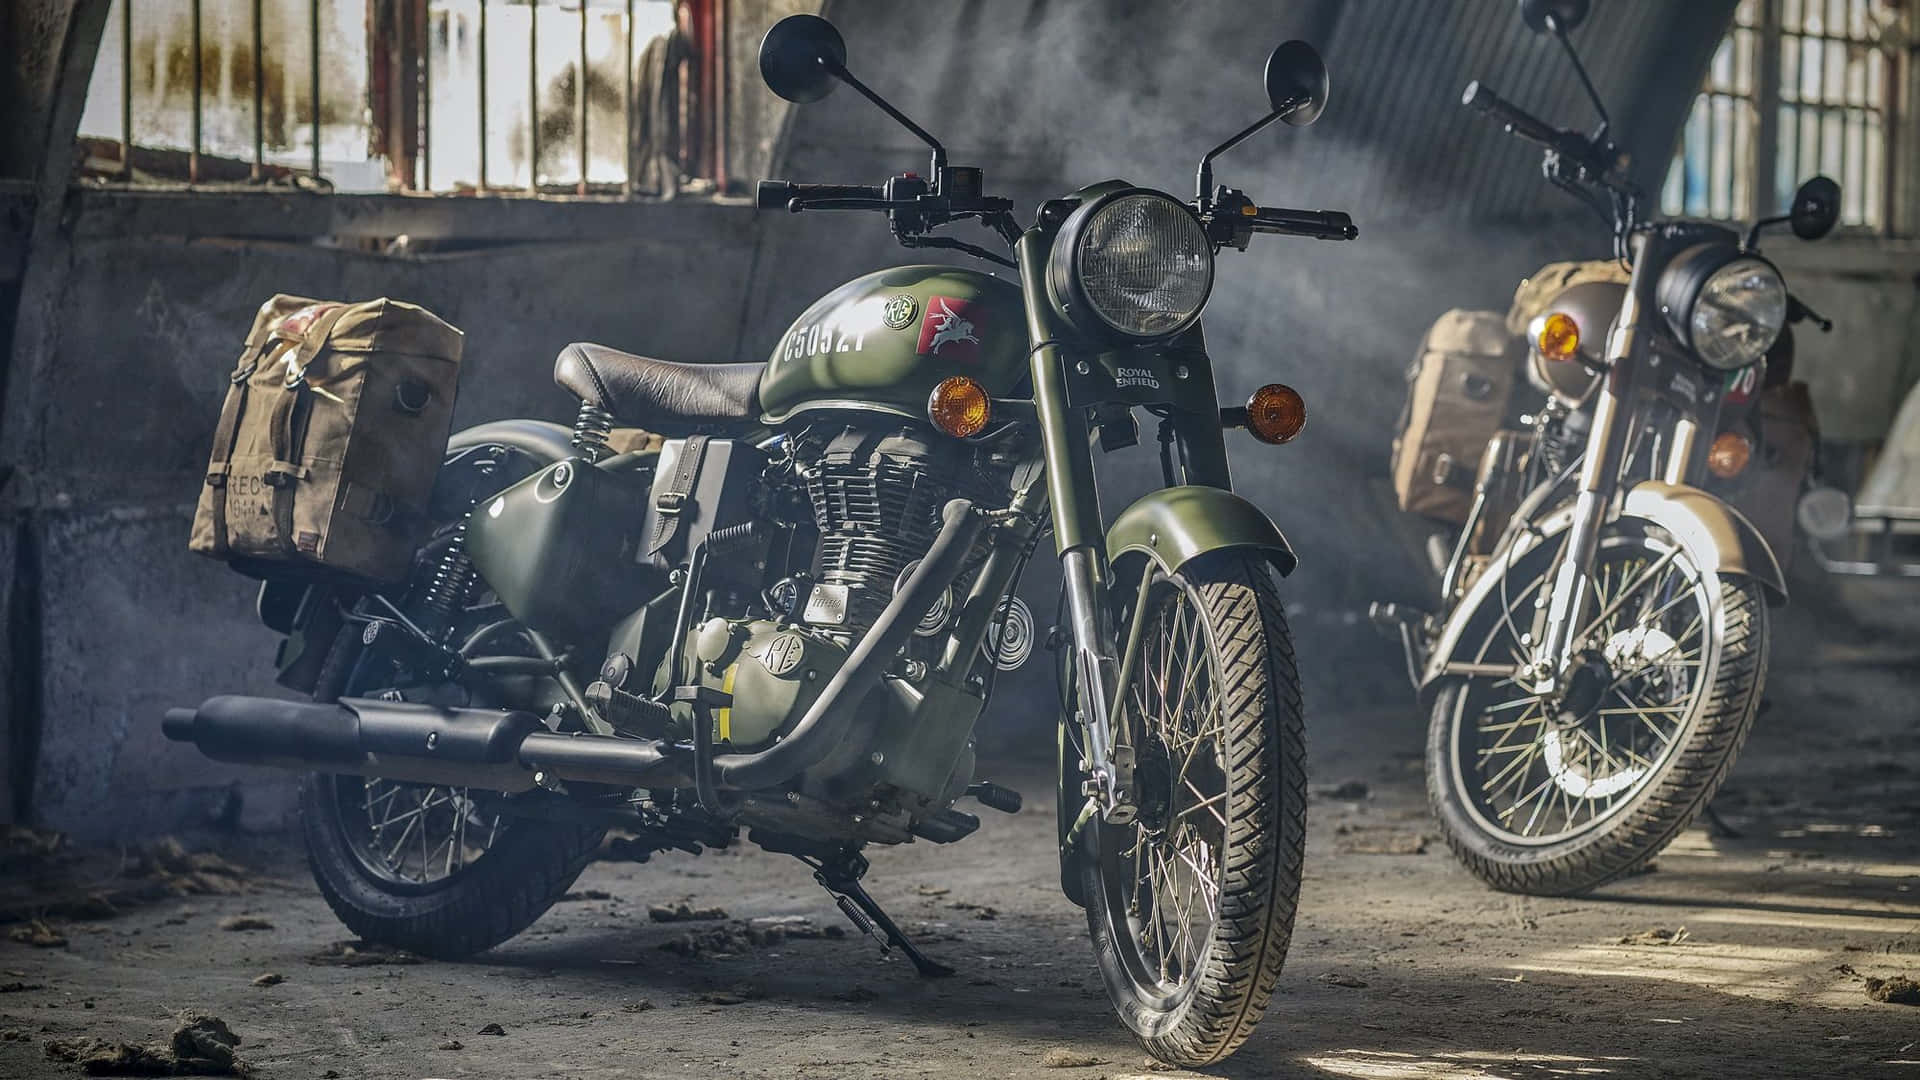 The iconic Royal Enfield Bullet.